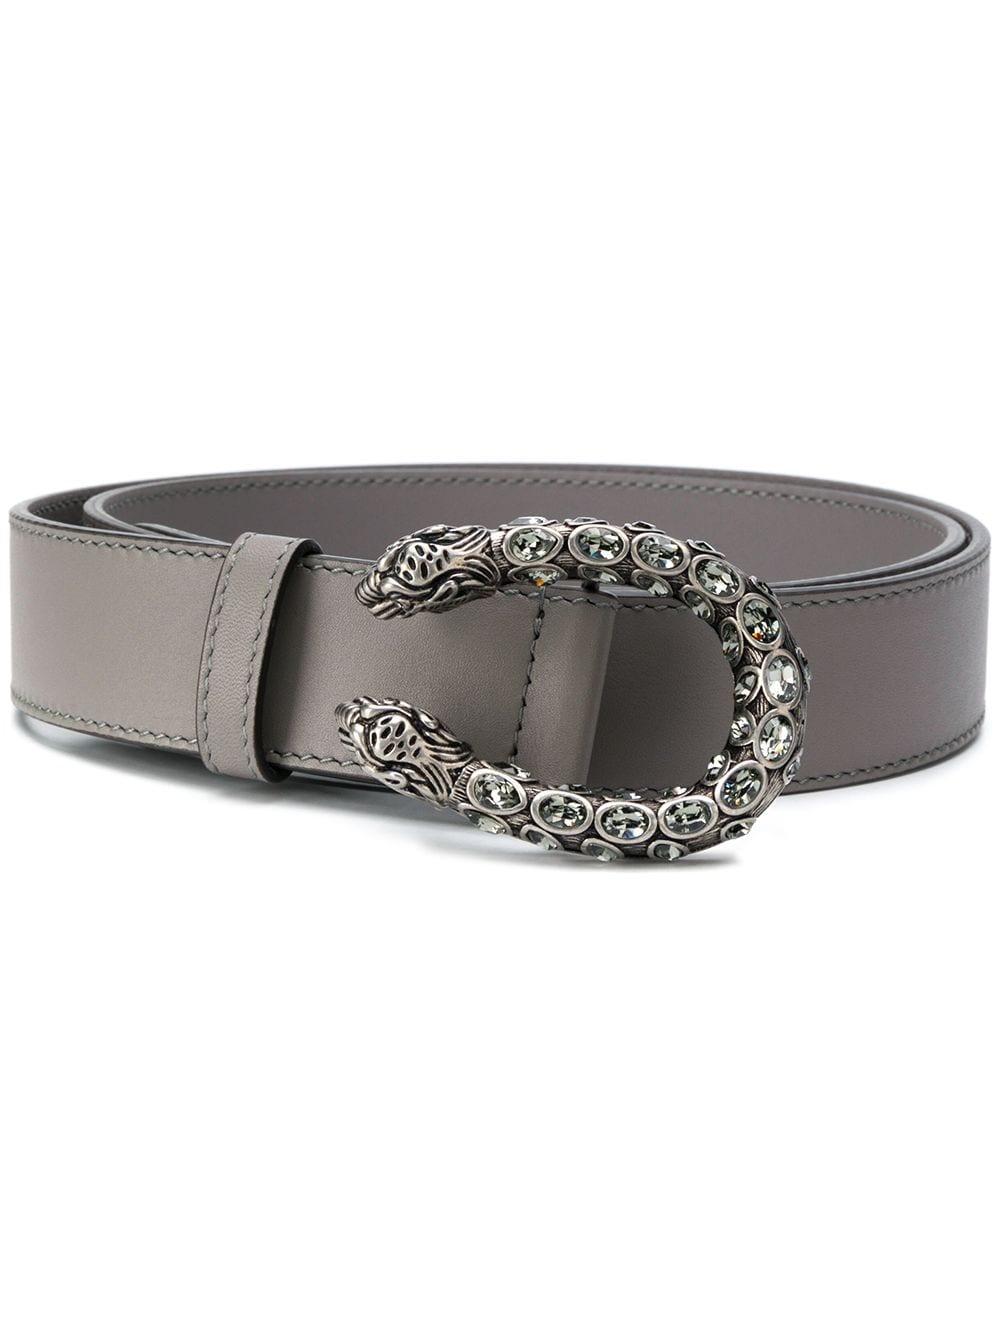 Gucci Dionysus Belt Outfit | Paul Smith